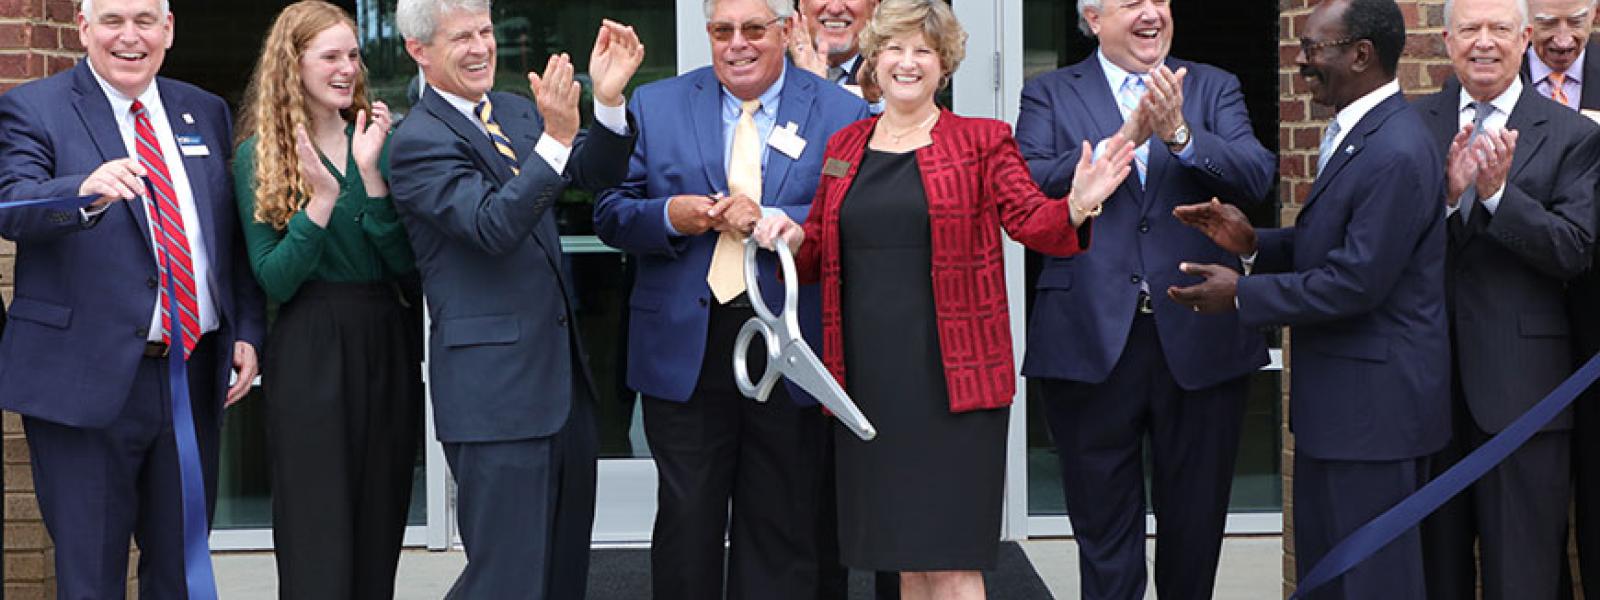 Lyn Cook cuts the ribbon on the John and Lyn Cook School of Business located in the Jones Center. (Photos by Kierston Smith)